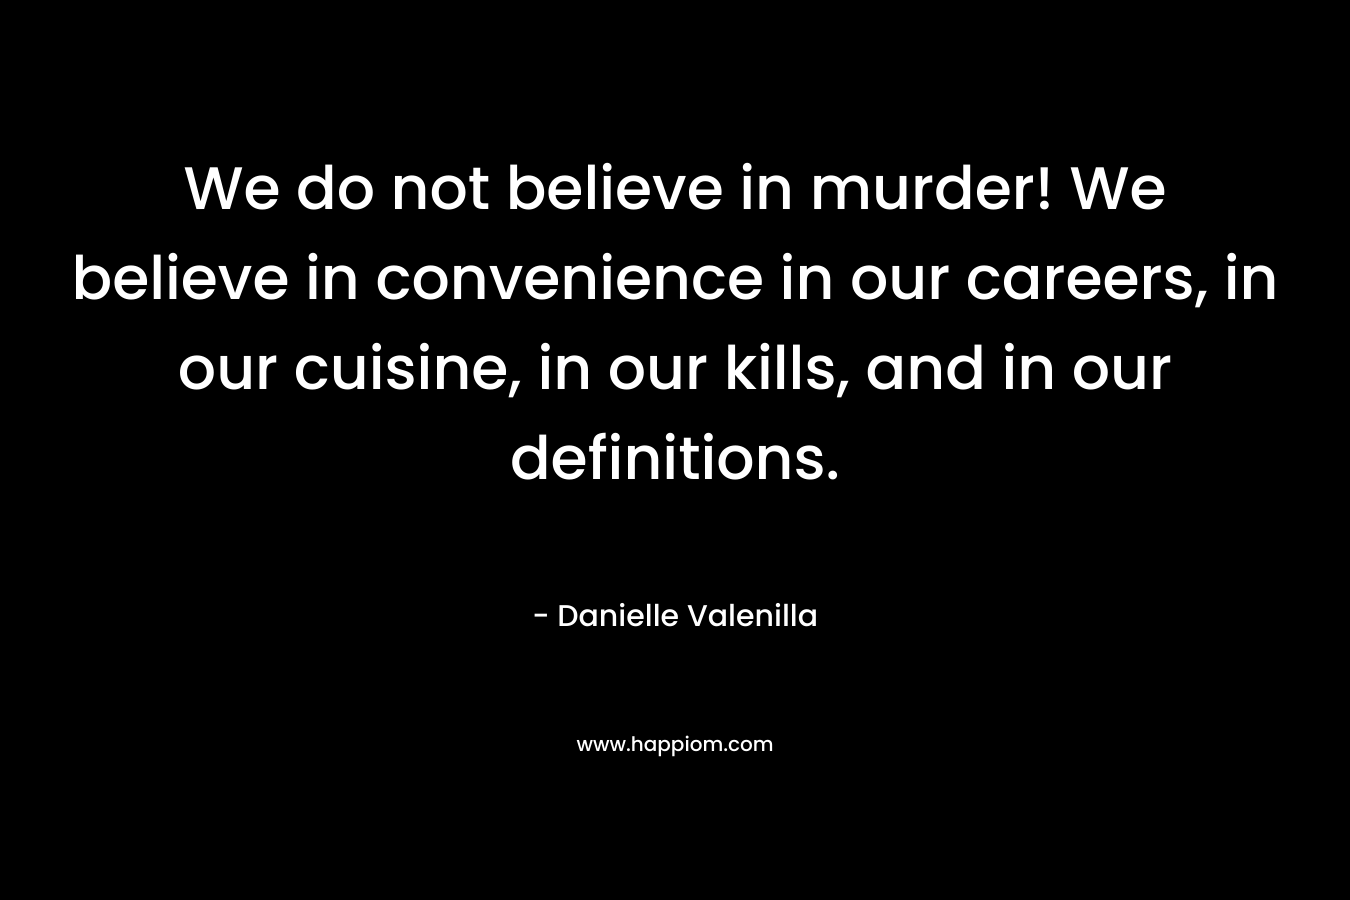 We do not believe in murder! We believe in convenience in our careers, in our cuisine, in our kills, and in our definitions. – Danielle Valenilla